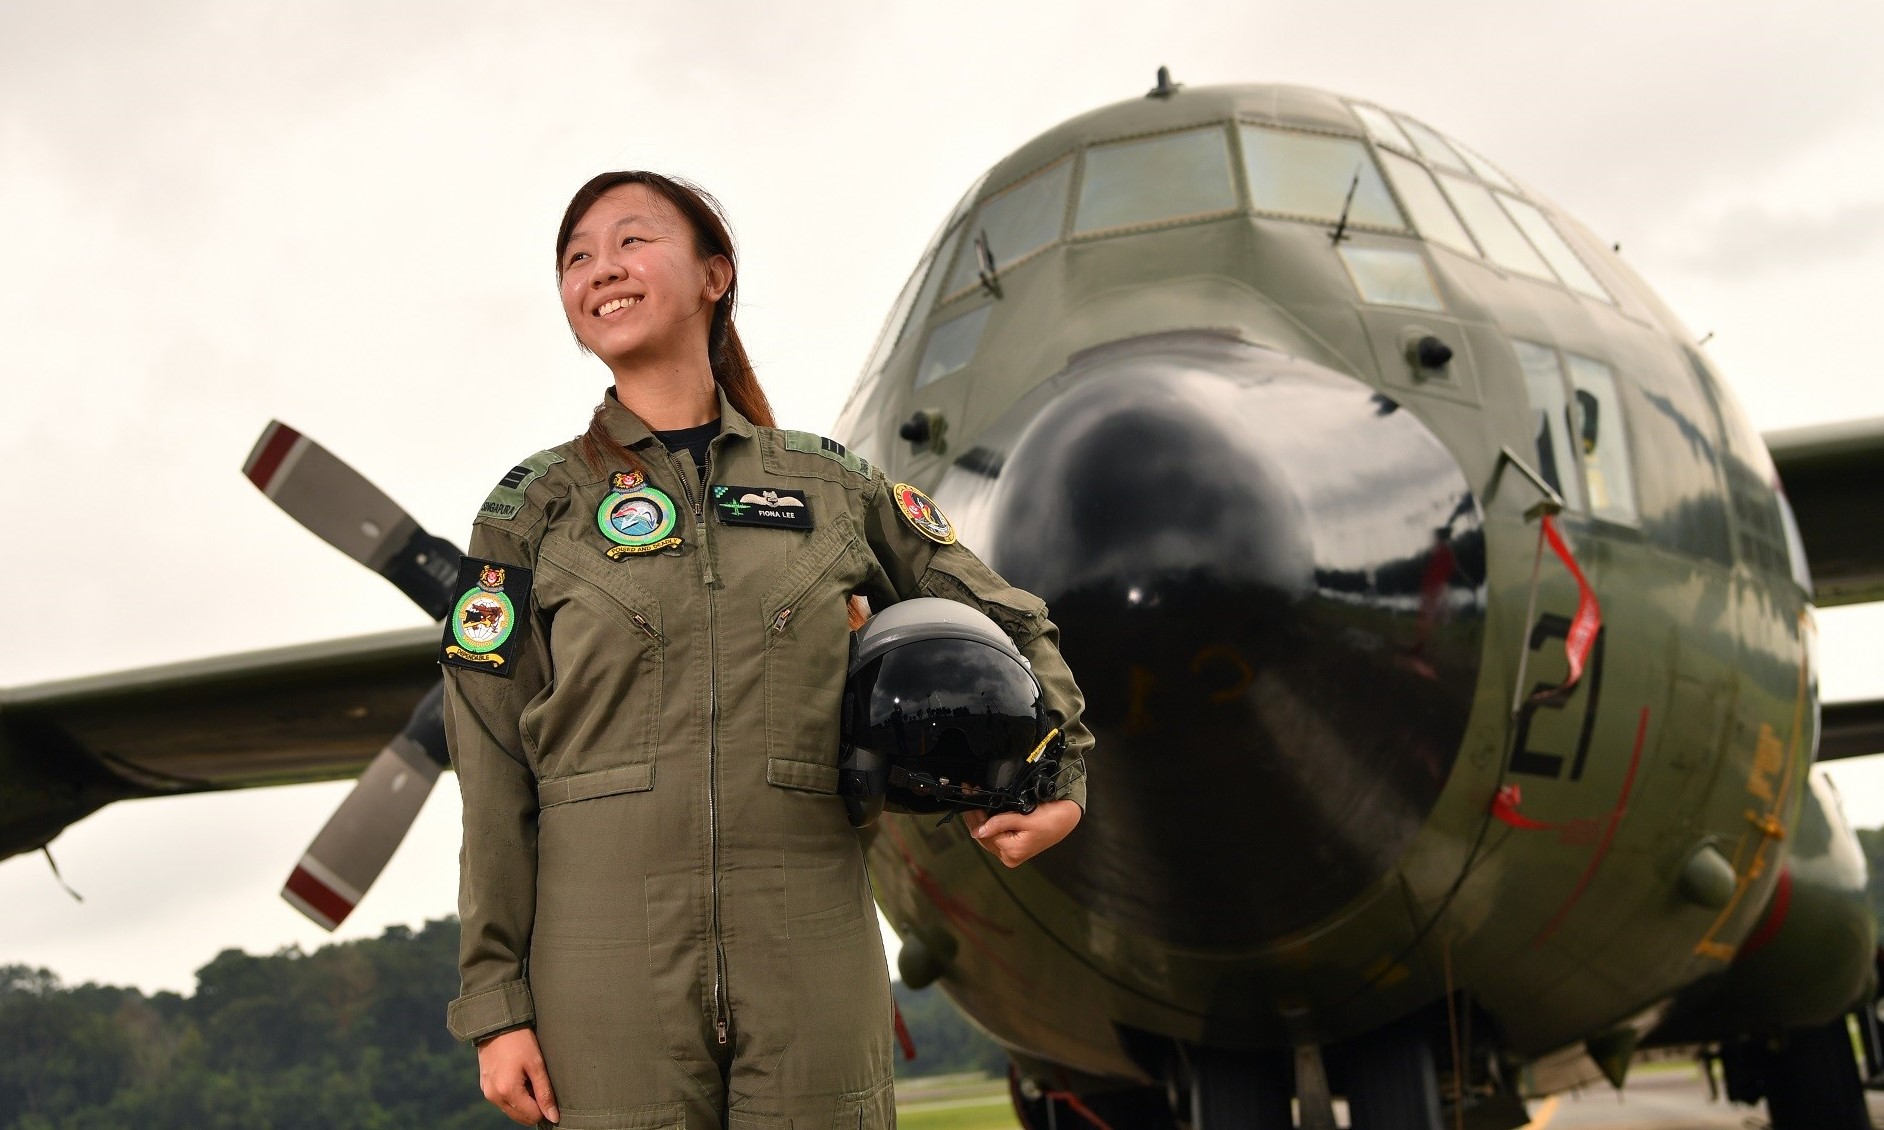 Finding her wings as a C-130 pilot